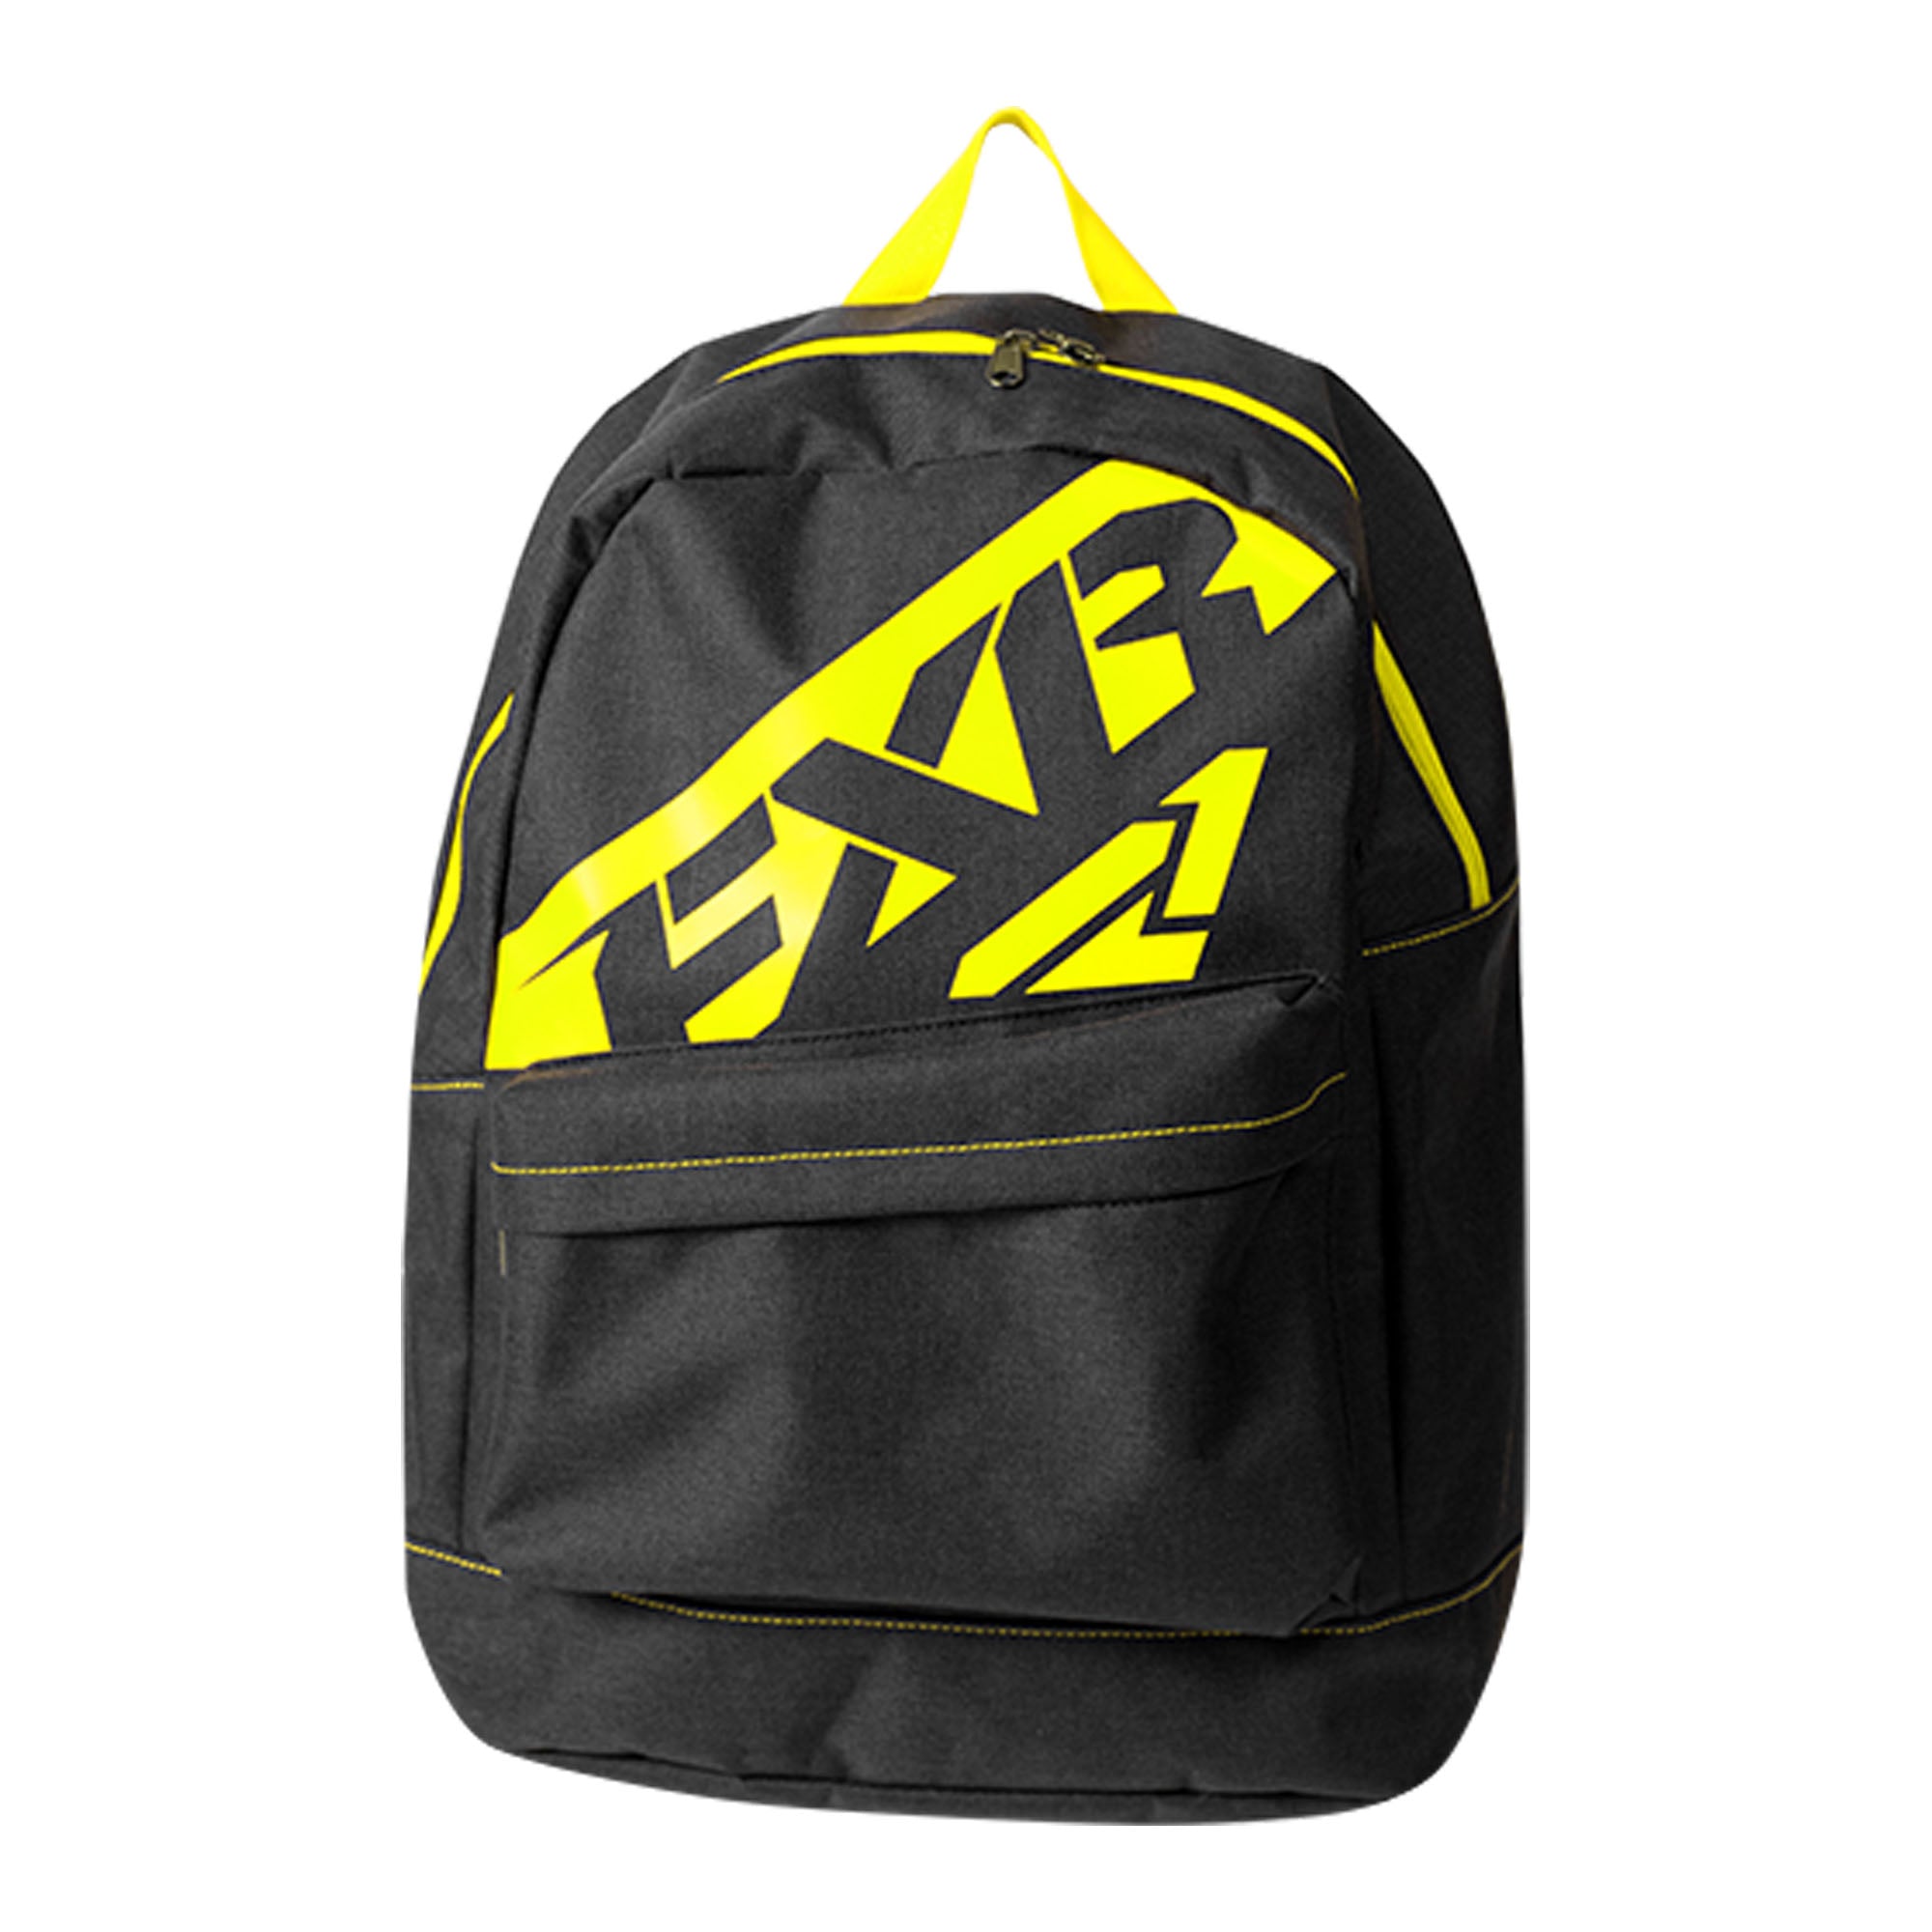 FXR  Holeshot Bag Authentic Computer Pouch Waterproof Lifestyle MX Snowmobile